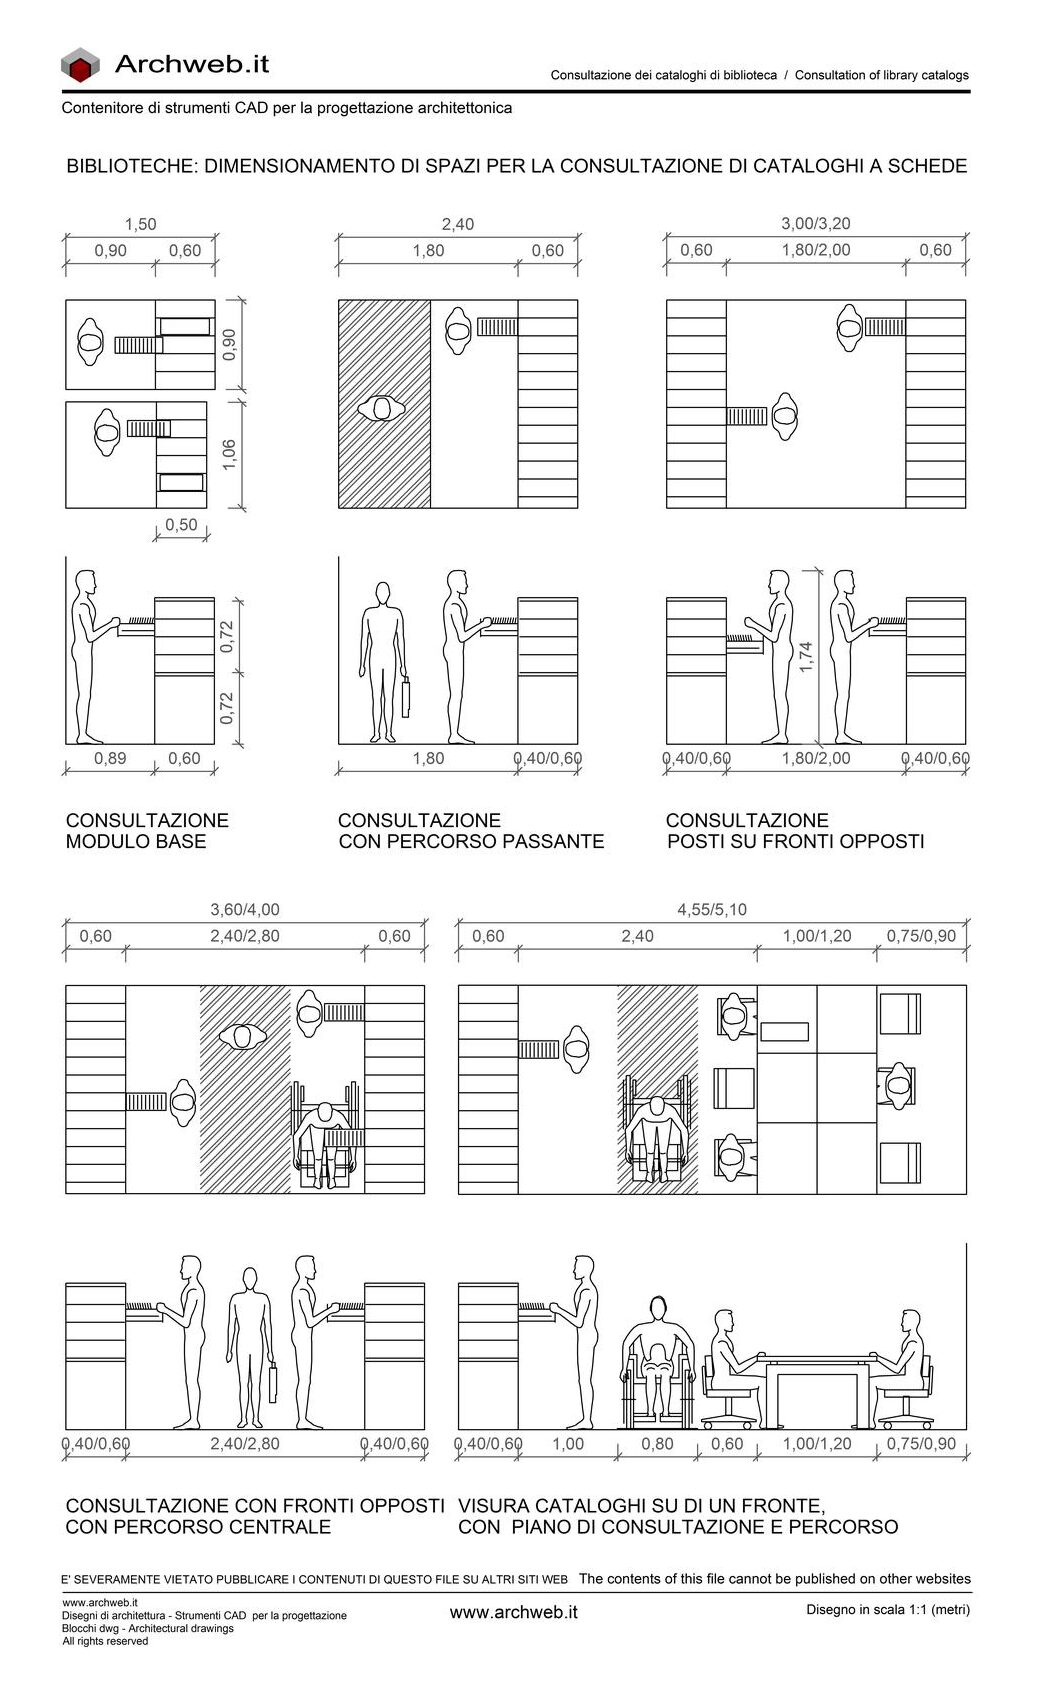 Libraries: dimensioning of spaces for consulting catalogues and cards.